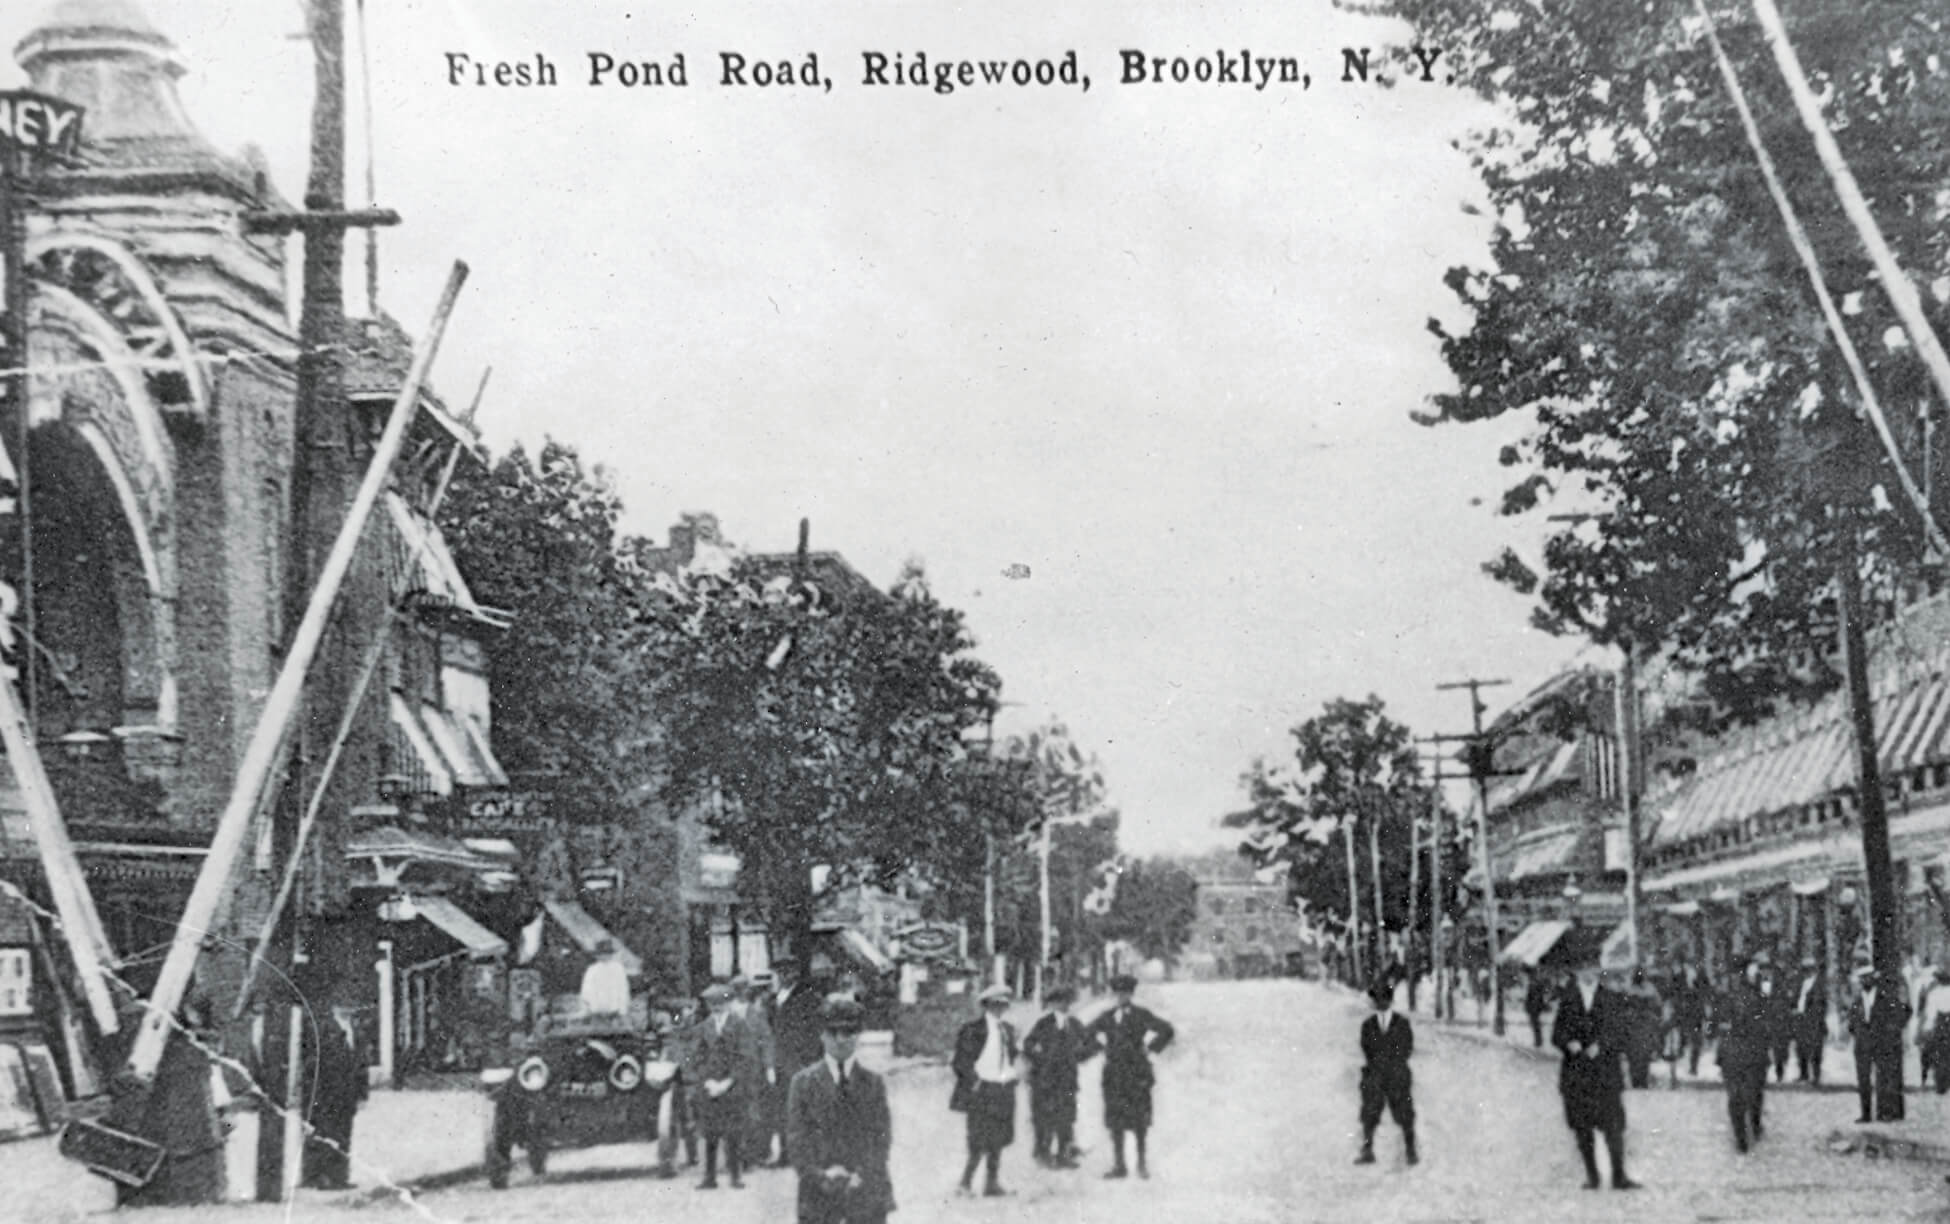 An early 20th-century postcard of Fresh Pond Road near present-day 67th Avenue in Ridgewood